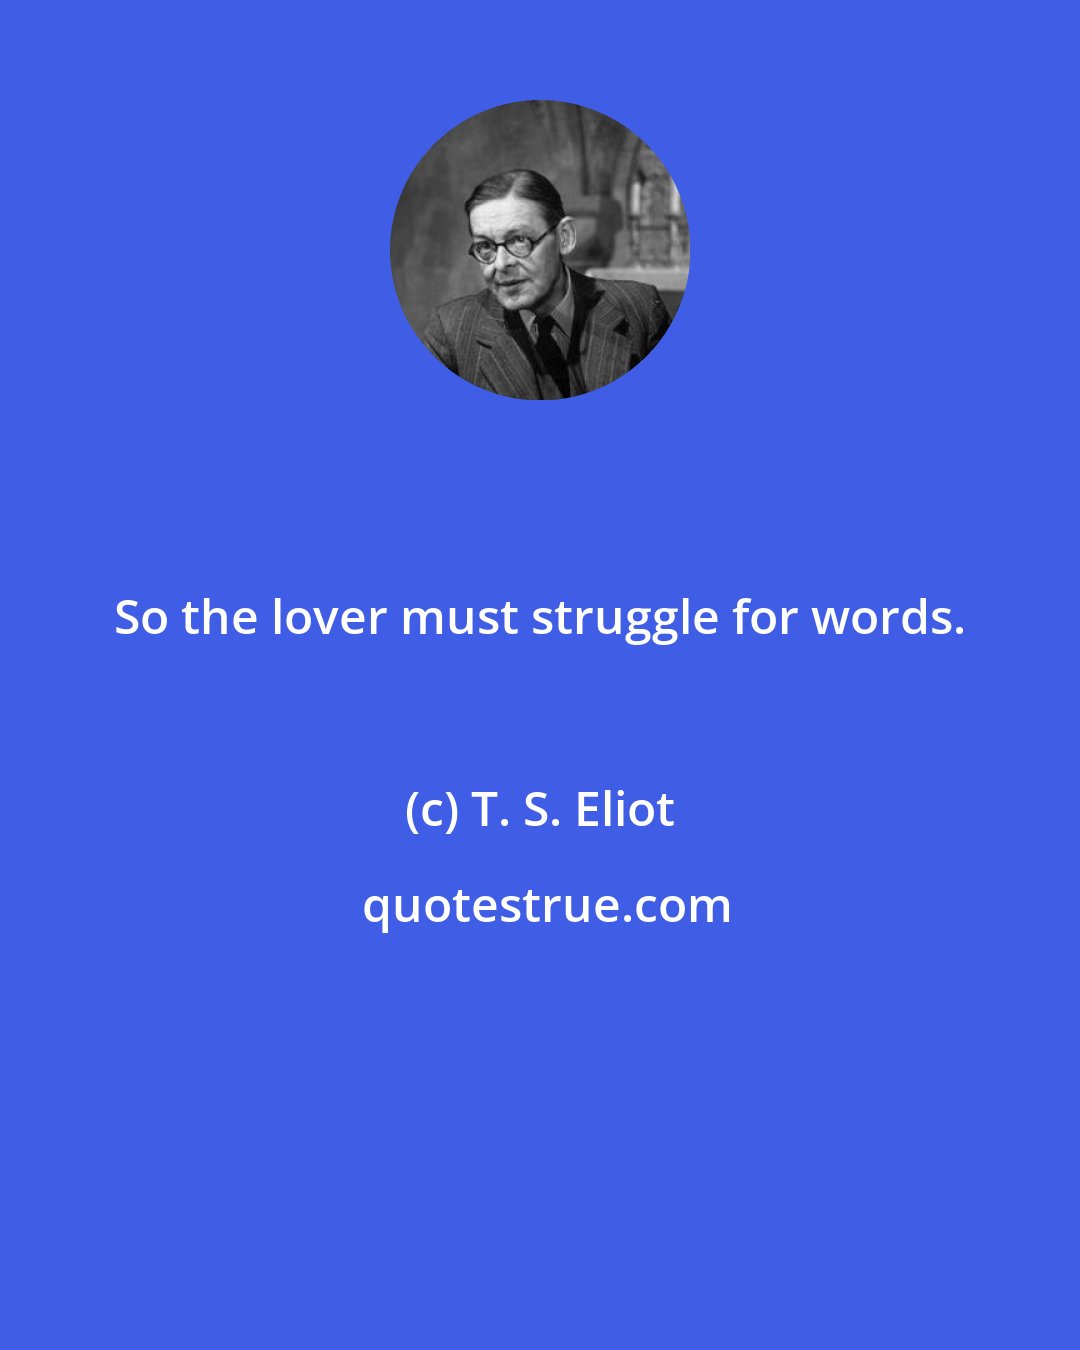 T. S. Eliot: So the lover must struggle for words.